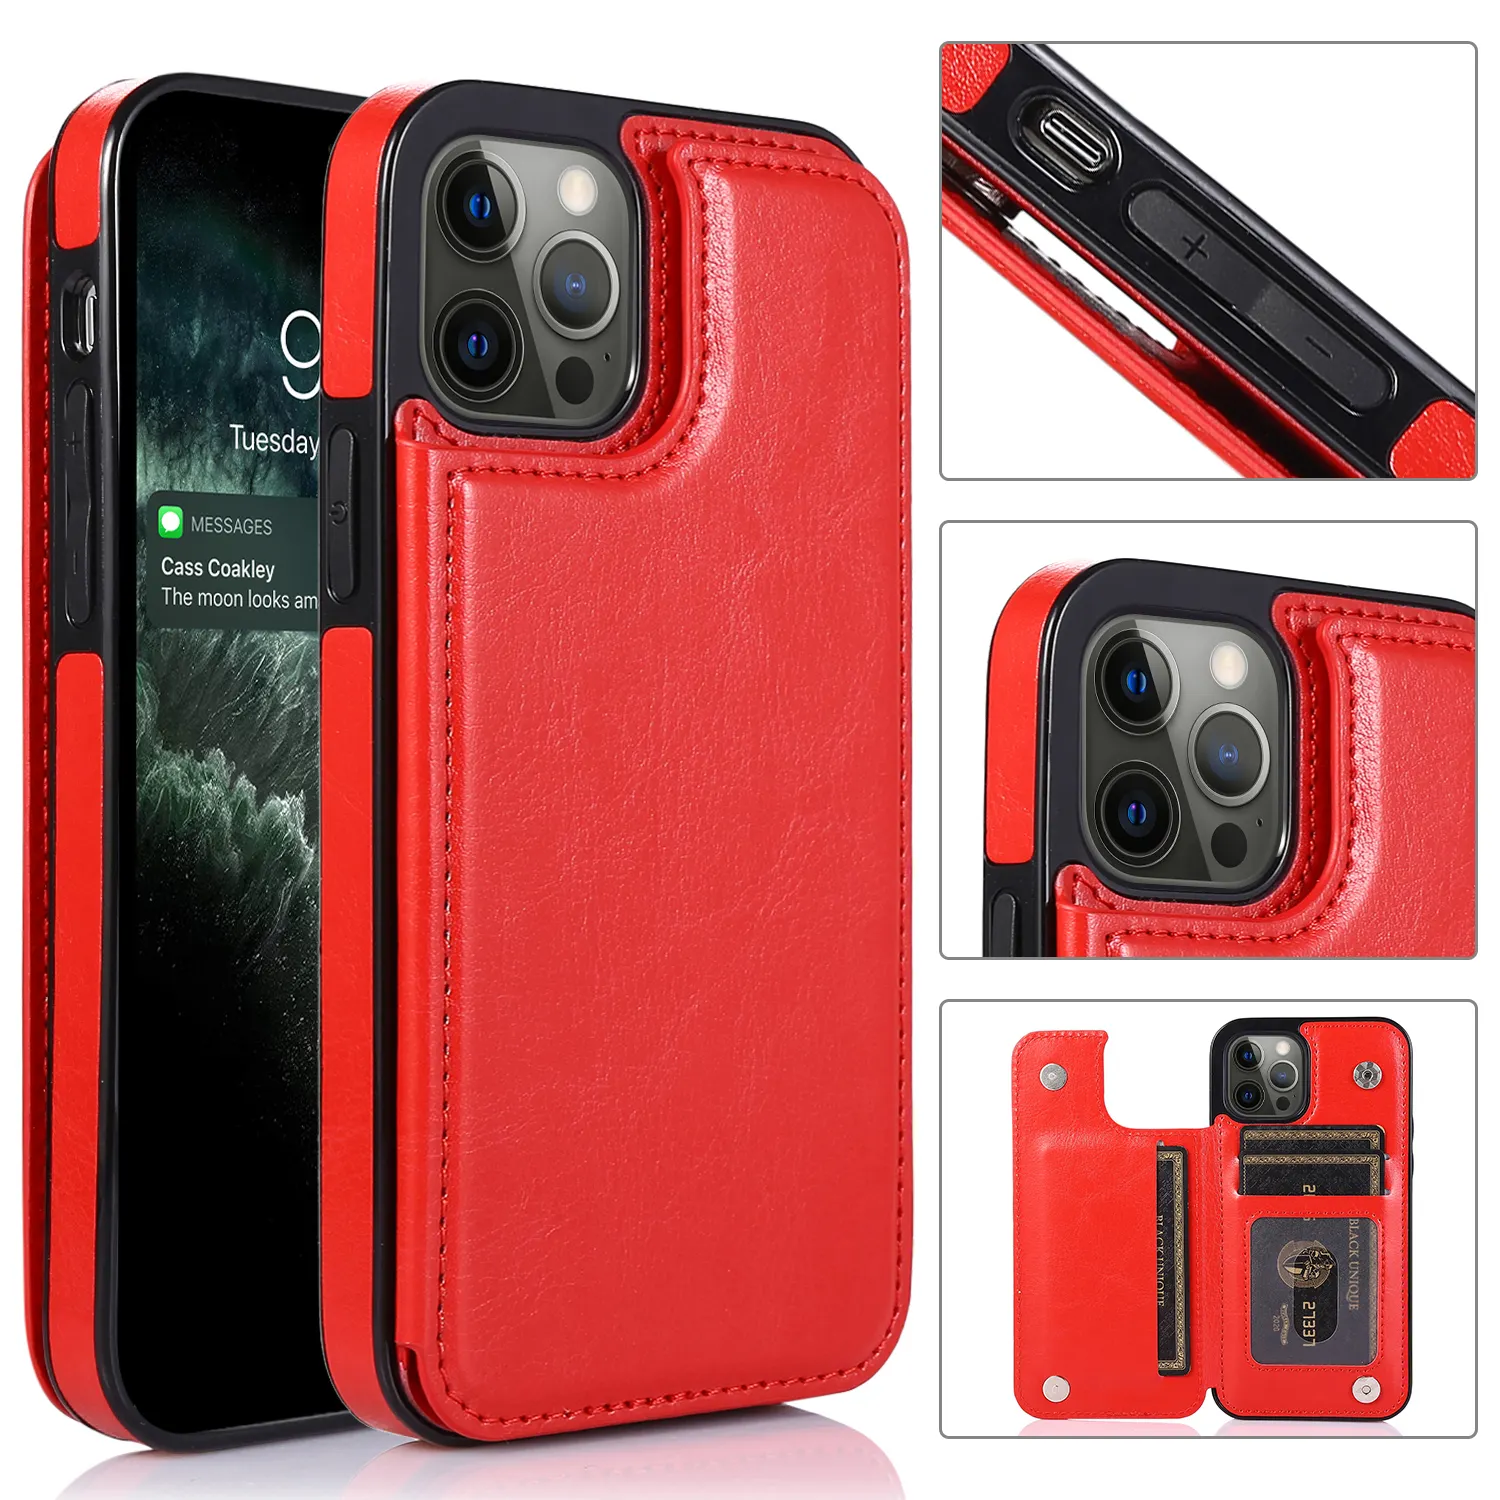 Multifunctional Leather Wallet Flip Phone Case Card Holder with Card Slot Phone Cover for Iphone 11 Phone case